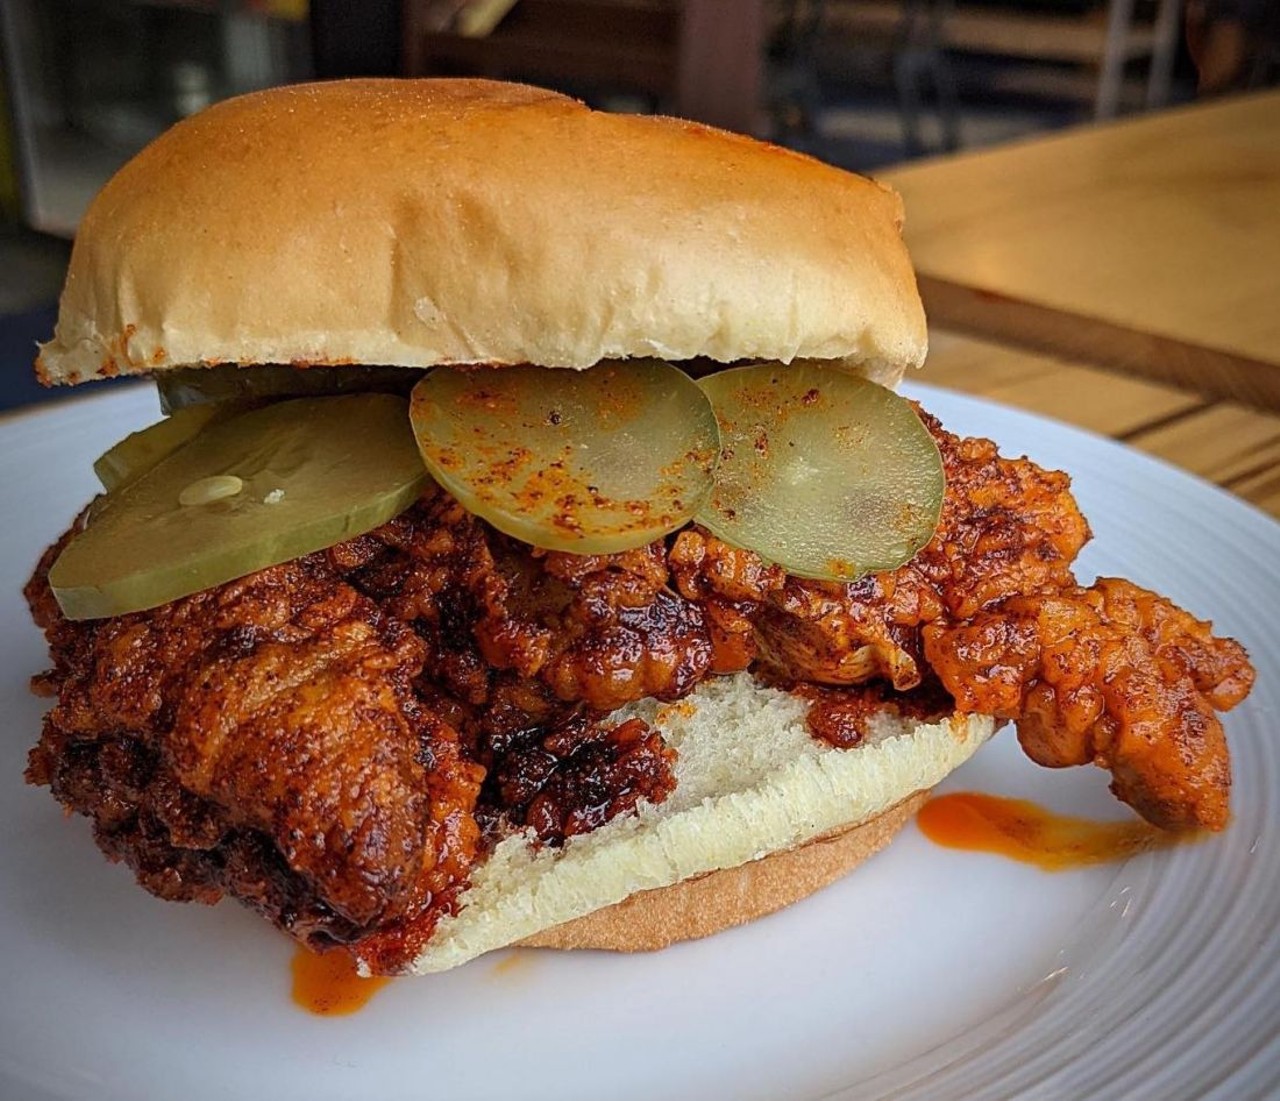  EDWINS
13024 Buckeye Rd., Cleveland
EDWINS made its name as a non-profit upscale French bistro helping formerly incarcerated individuals training in the culinary and hospitality industry. They&#146;ve expanded to two more restaurants, a bakery and a butcher shop all while staying true to their original mission. Recently, they added a Nashville hot chicken sandwich on a temporary basis to their butcher shop menu and it was so popular they had to keep it full time.
Photo via EDWINS/Facebook